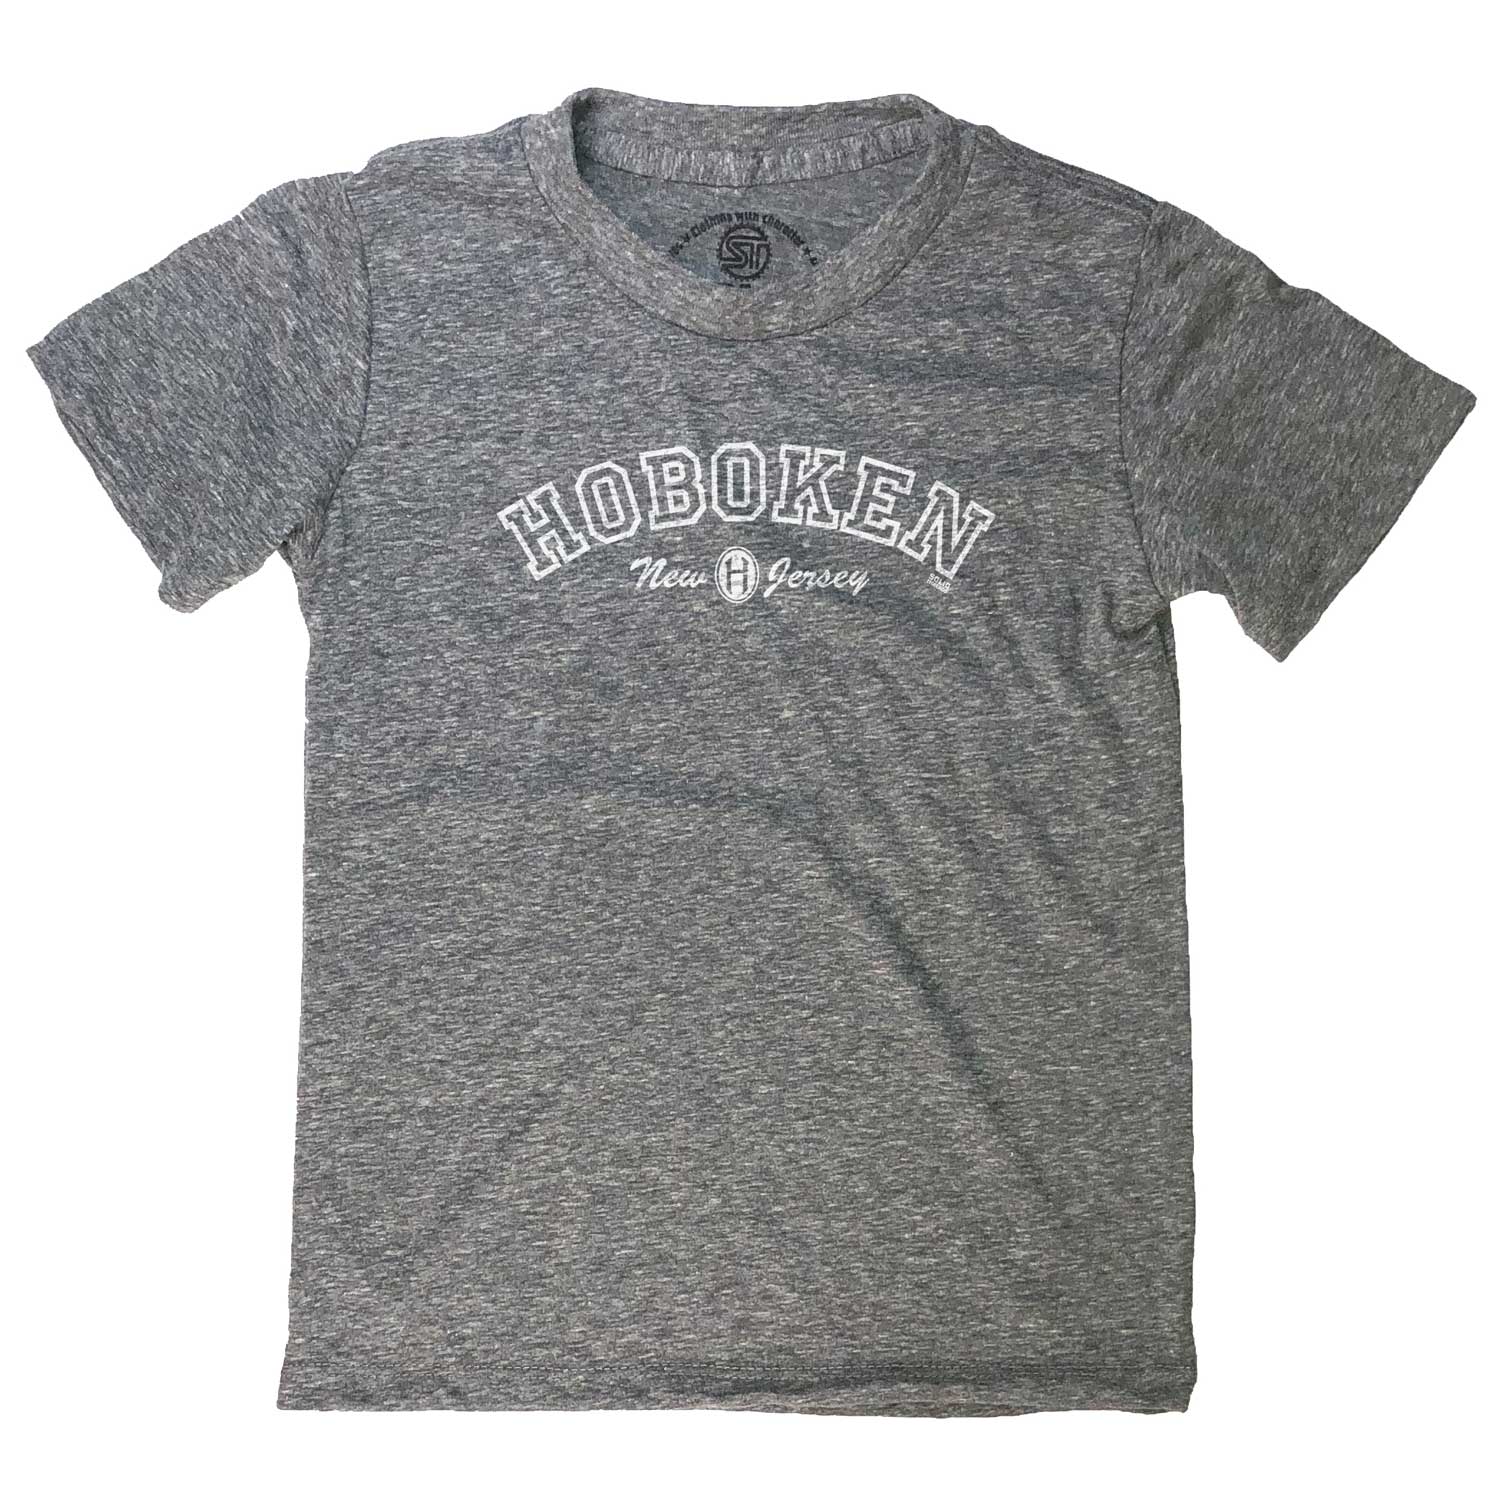 Kids Hoboken Collegiate Cool Graphic T-Shirt | Cute Retro New Jersey Triblend Tee | Solid Threads